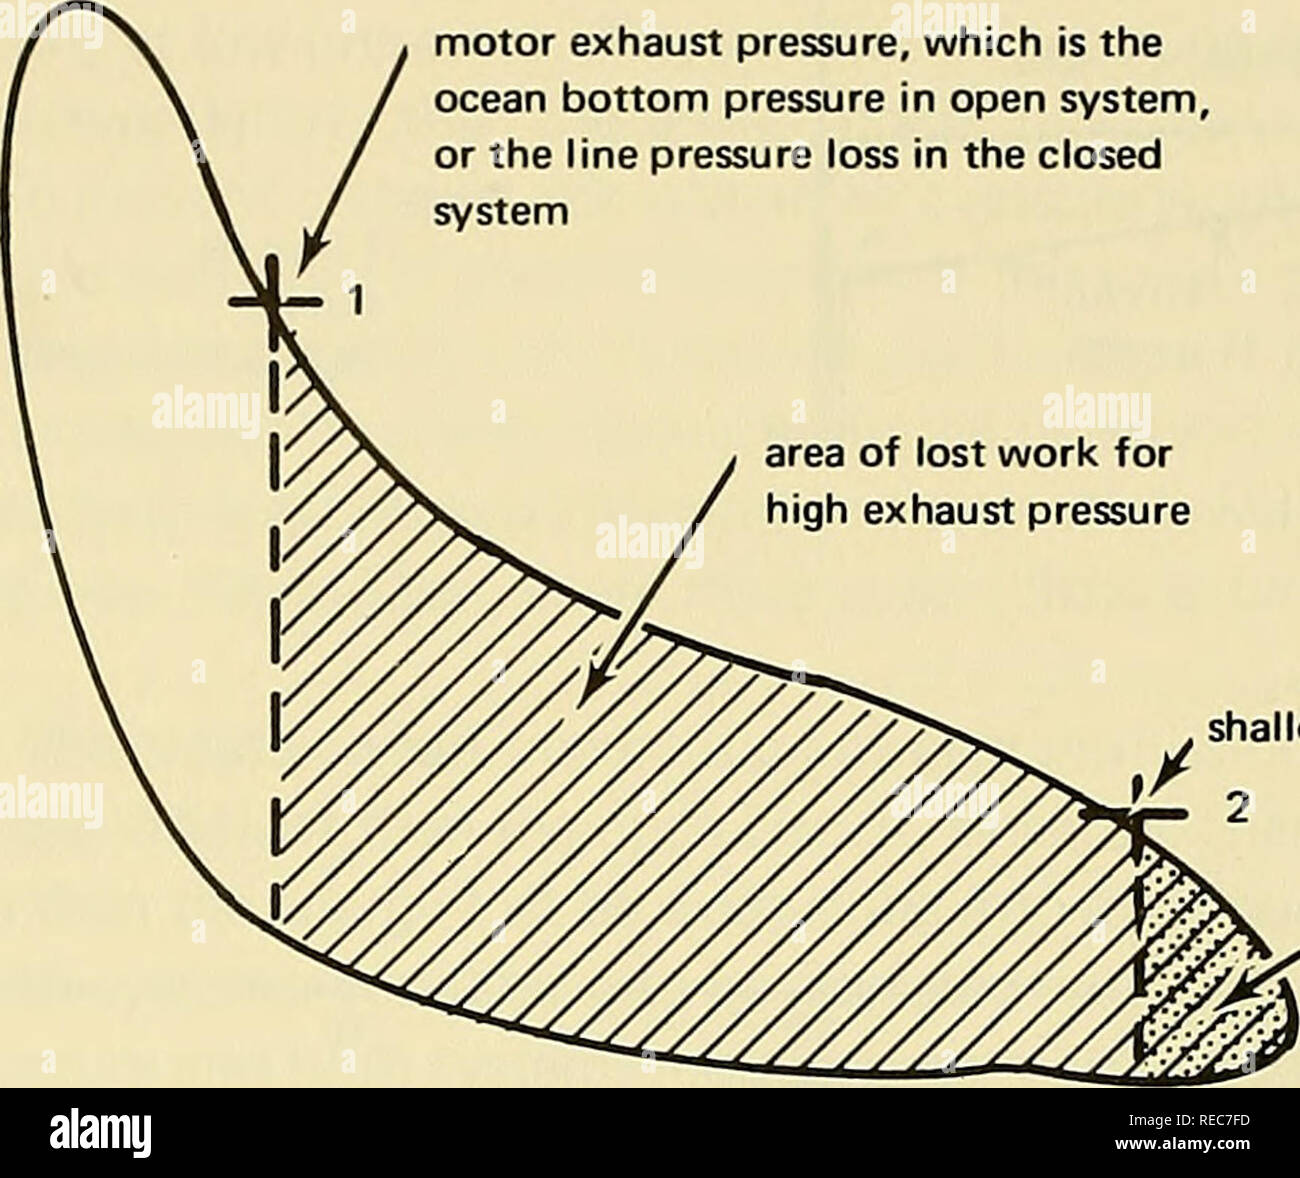 . Concepts for drilling and excavating in and below the ocean bottom. Underwater drilling; Ocean bottom. motor exhaust pressure, which is the ocean bottom pressure in open system, or the line pressure loss in the closed system area of lost work for high exhaust pressure. shallow motor exhaust pressure /7^^ less work lost at (M^ shallow exhaust pressure ^^ Volume Figure 25. Pressure-volume diagram for pneumatic systems. Only one of the mechanical transmission systems, the linear-motion system, was found to be compact and efficient. This cable system required a 1-inch-diameter galvanized bridge  Stock Photo